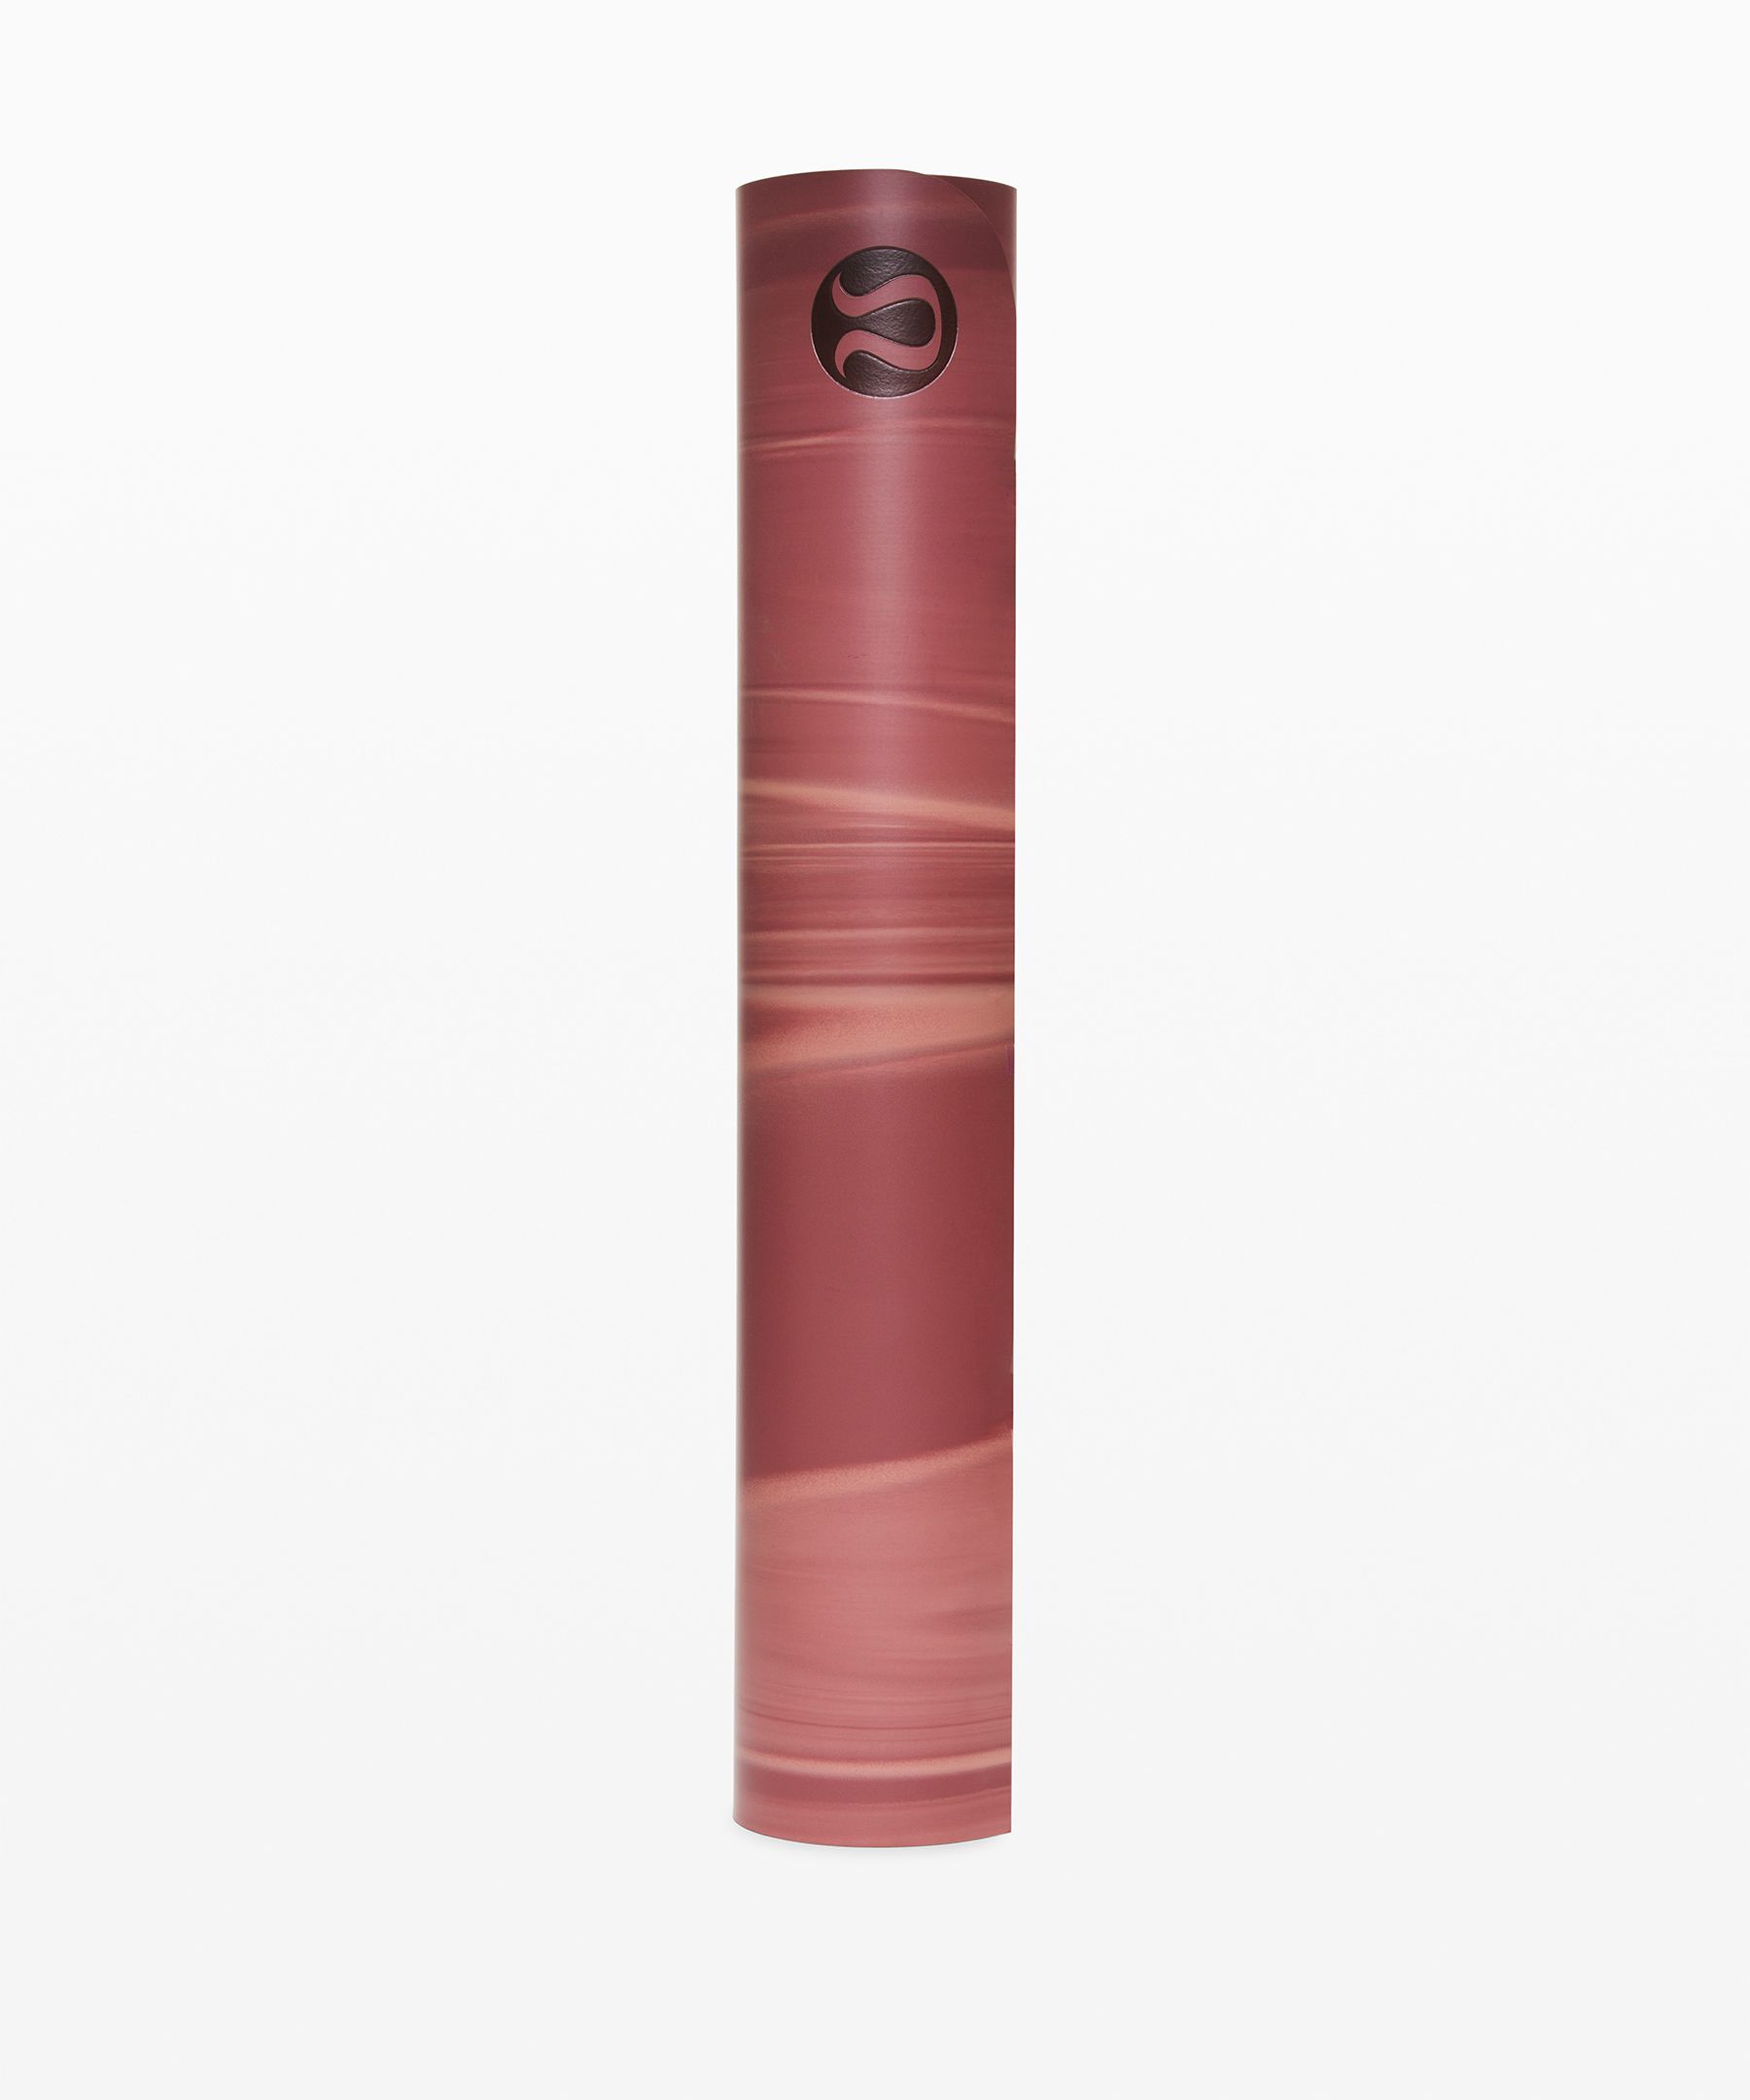 Lululemon The Reversible (big) Mat In Smoky Red/chalky Rose/chalky Rose